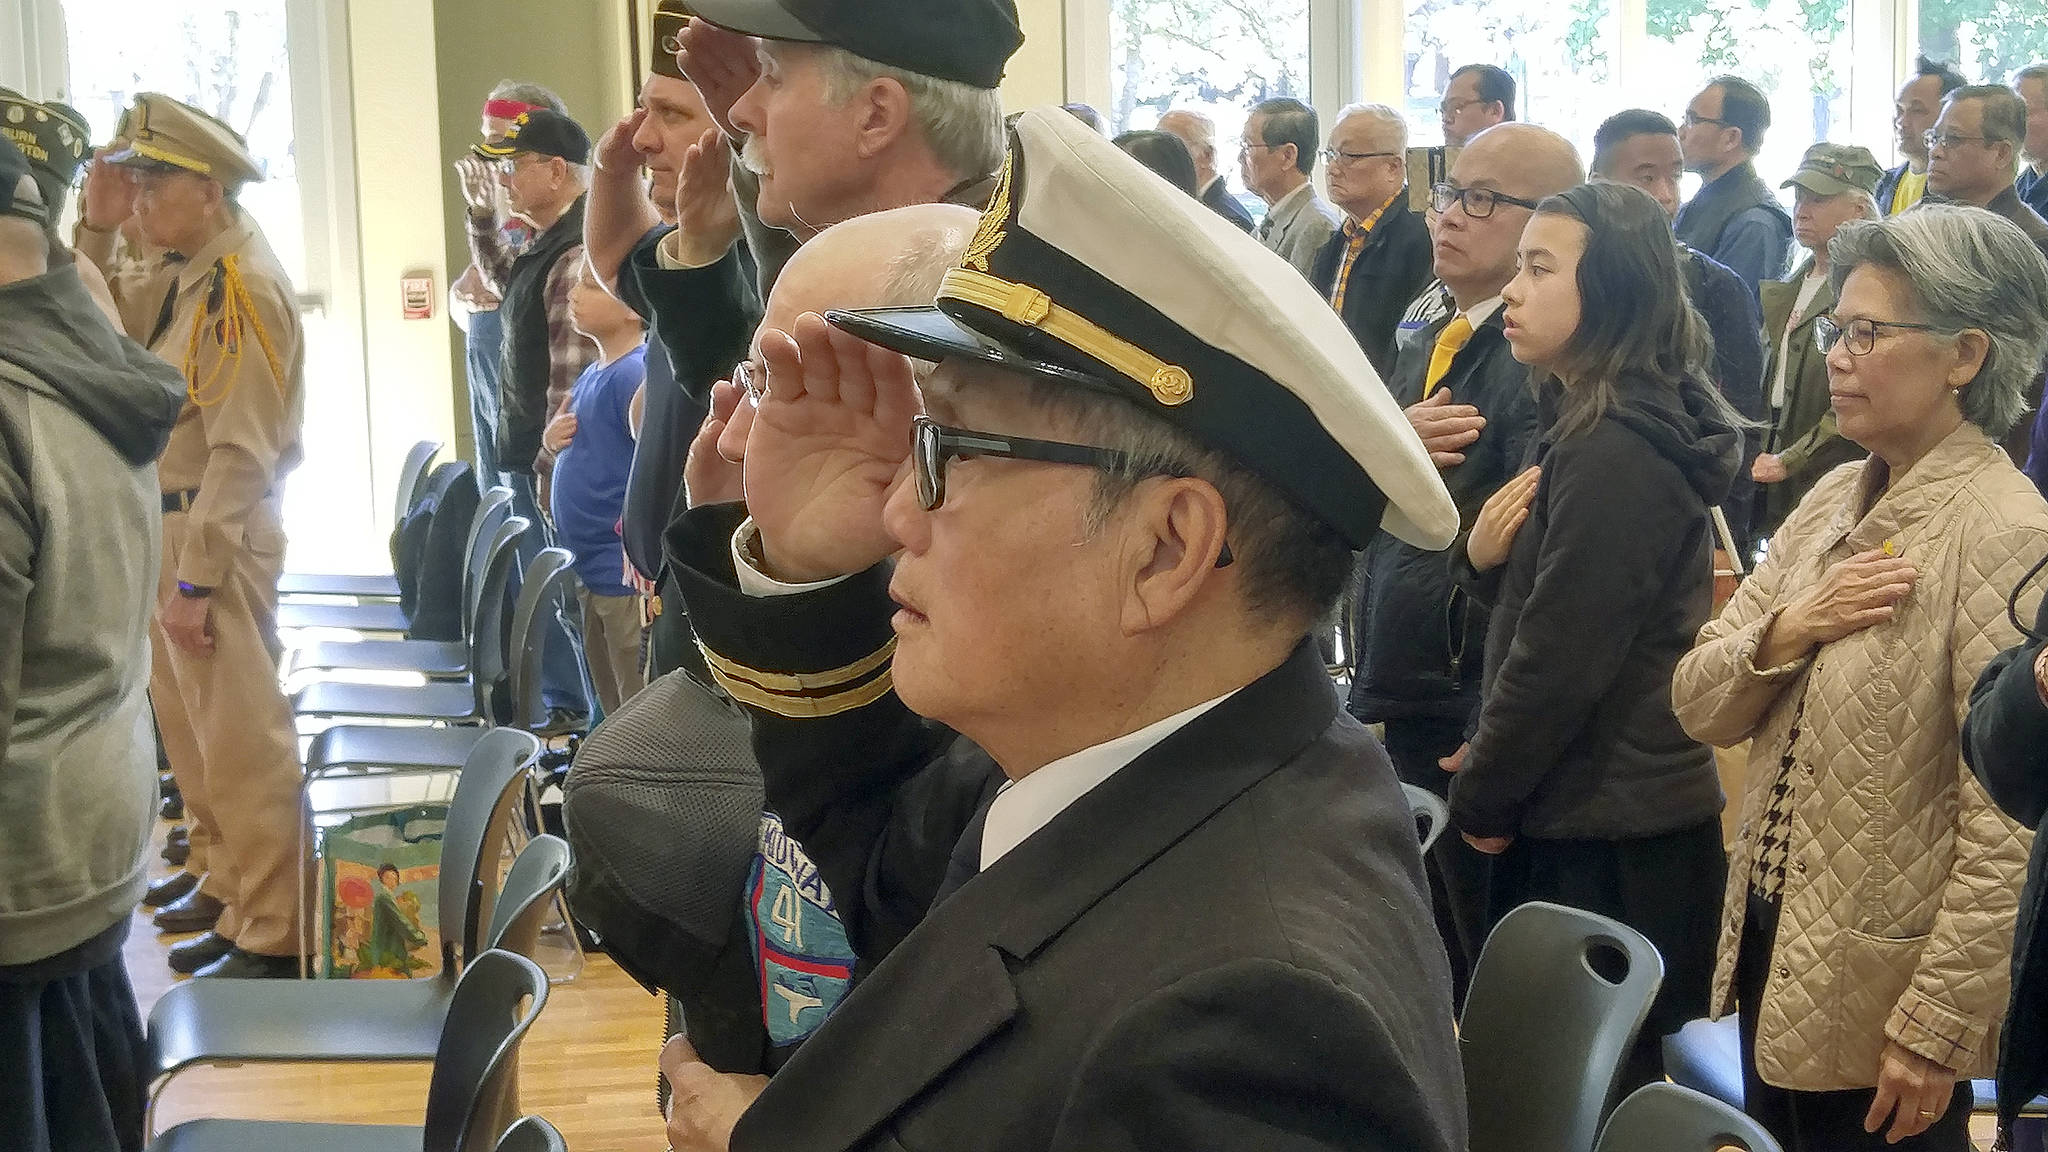 Thao Van Nguyen, a former officer with the South Vietnamese Navy, salutes the flag of his country during Black April ceremonies at Auburn’s Activities Center at Les Gove Park last Sunday, marking the 44th anniversary of the fall of Saigon on April 30, 1975. ROBERT WHALE, Auburn Reporter